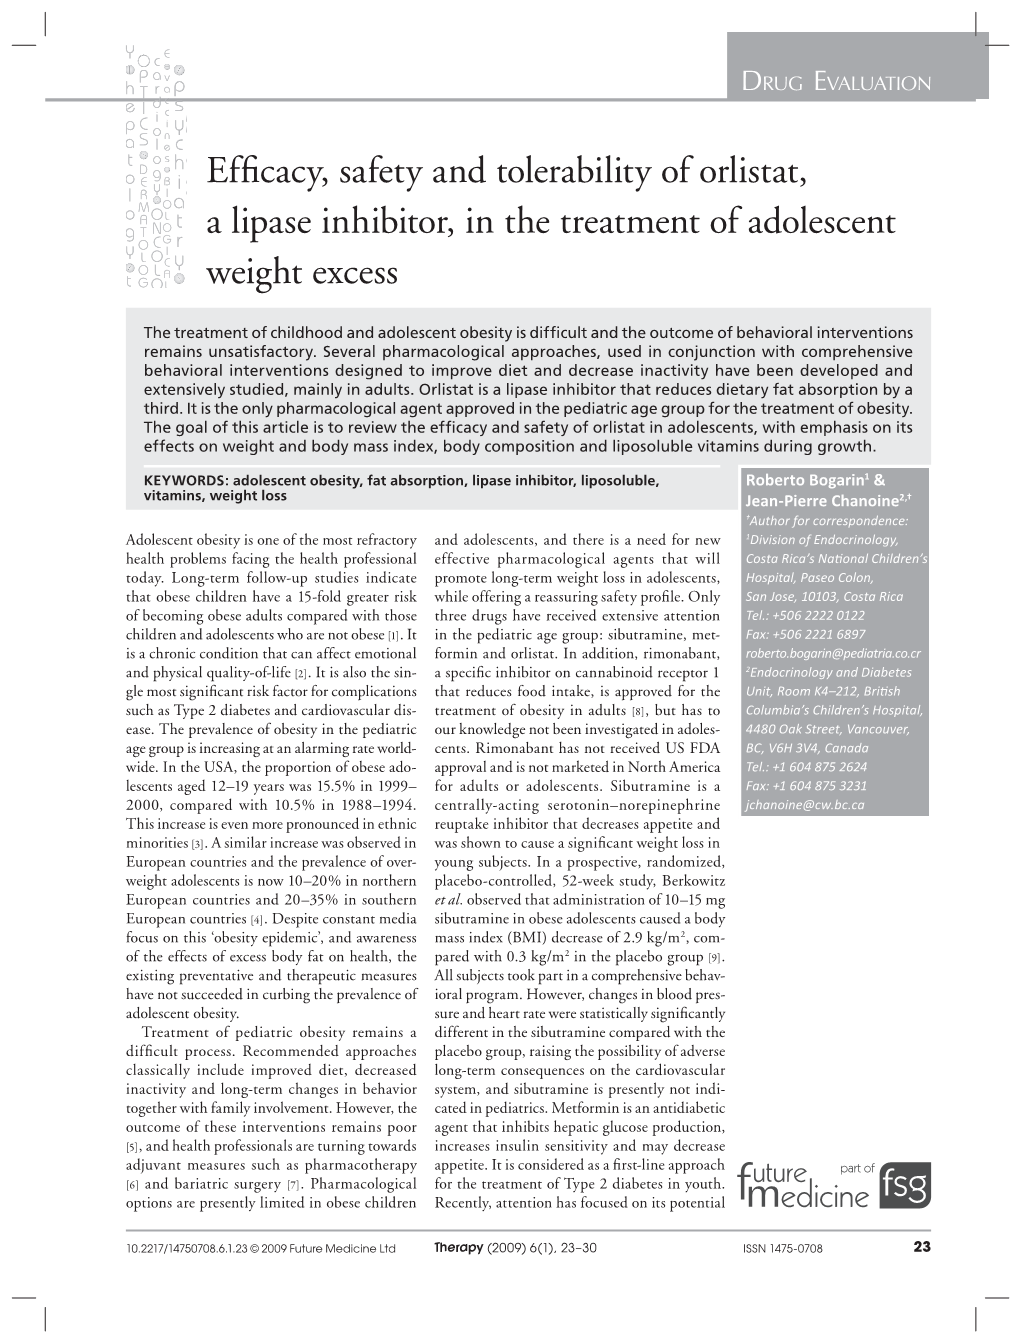 Efficacy, Safety and Tolerability of Orlistat, a Lipase Inhibitor, in The